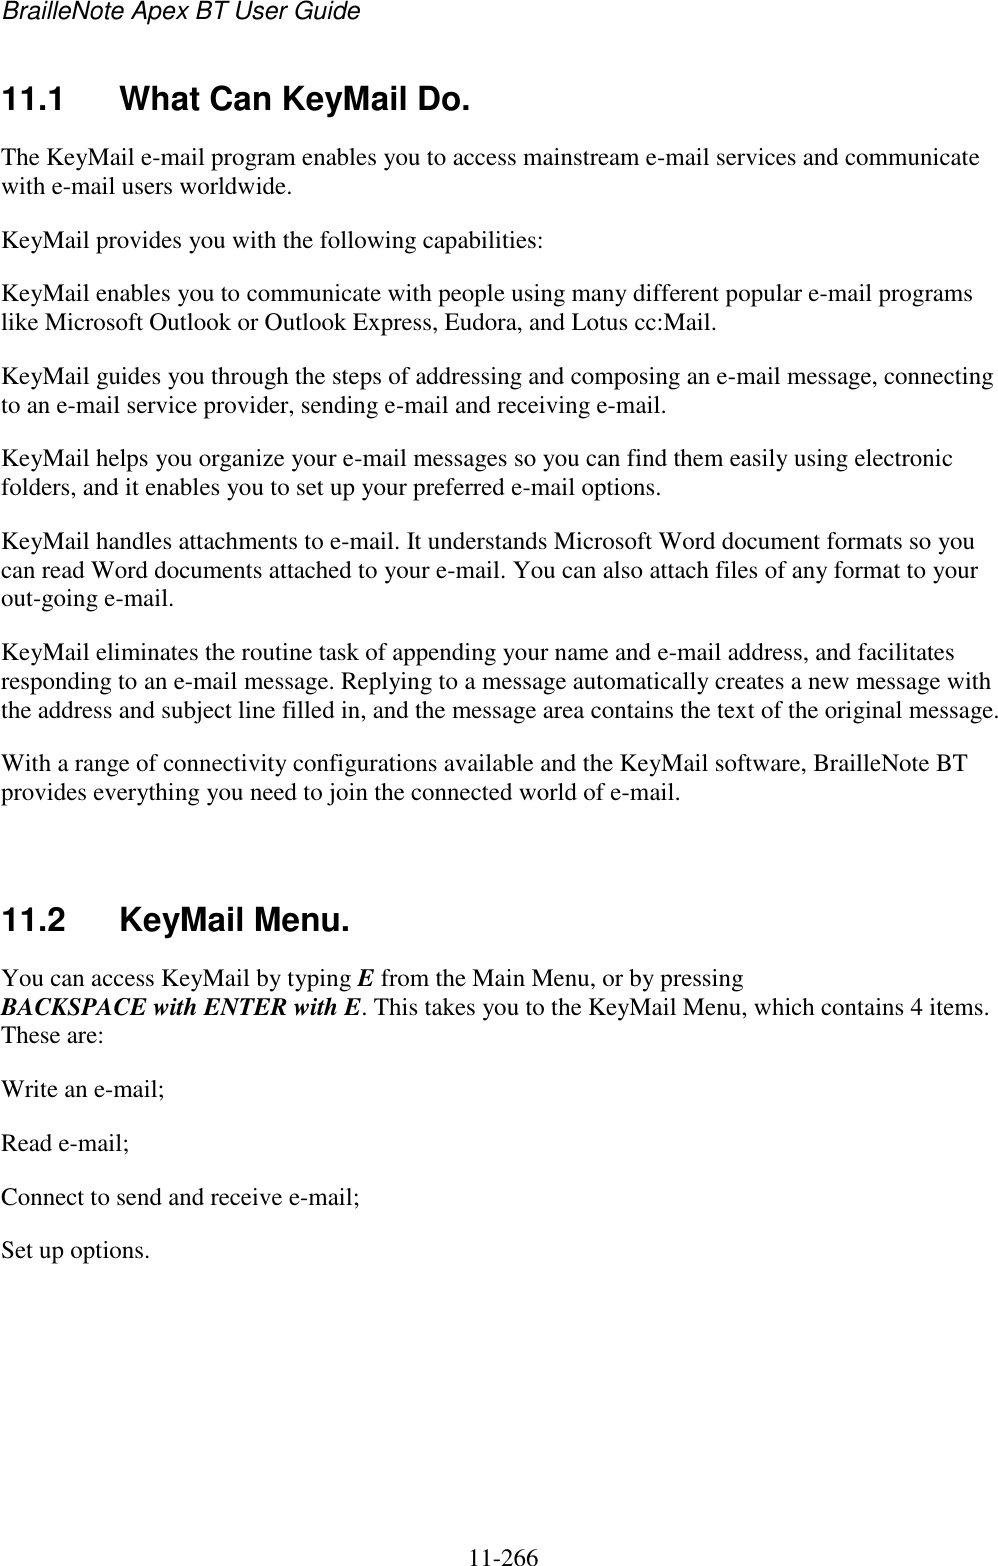 BrailleNote Apex BT User Guide   11-266   11.1  What Can KeyMail Do. The KeyMail e-mail program enables you to access mainstream e-mail services and communicate with e-mail users worldwide. KeyMail provides you with the following capabilities: KeyMail enables you to communicate with people using many different popular e-mail programs like Microsoft Outlook or Outlook Express, Eudora, and Lotus cc:Mail. KeyMail guides you through the steps of addressing and composing an e-mail message, connecting to an e-mail service provider, sending e-mail and receiving e-mail. KeyMail helps you organize your e-mail messages so you can find them easily using electronic folders, and it enables you to set up your preferred e-mail options. KeyMail handles attachments to e-mail. It understands Microsoft Word document formats so you can read Word documents attached to your e-mail. You can also attach files of any format to your out-going e-mail. KeyMail eliminates the routine task of appending your name and e-mail address, and facilitates responding to an e-mail message. Replying to a message automatically creates a new message with the address and subject line filled in, and the message area contains the text of the original message. With a range of connectivity configurations available and the KeyMail software, BrailleNote BT provides everything you need to join the connected world of e-mail.   11.2  KeyMail Menu. You can access KeyMail by typing E from the Main Menu, or by pressing BACKSPACE with ENTER with E. This takes you to the KeyMail Menu, which contains 4 items. These are: Write an e-mail; Read e-mail; Connect to send and receive e-mail; Set up options.   